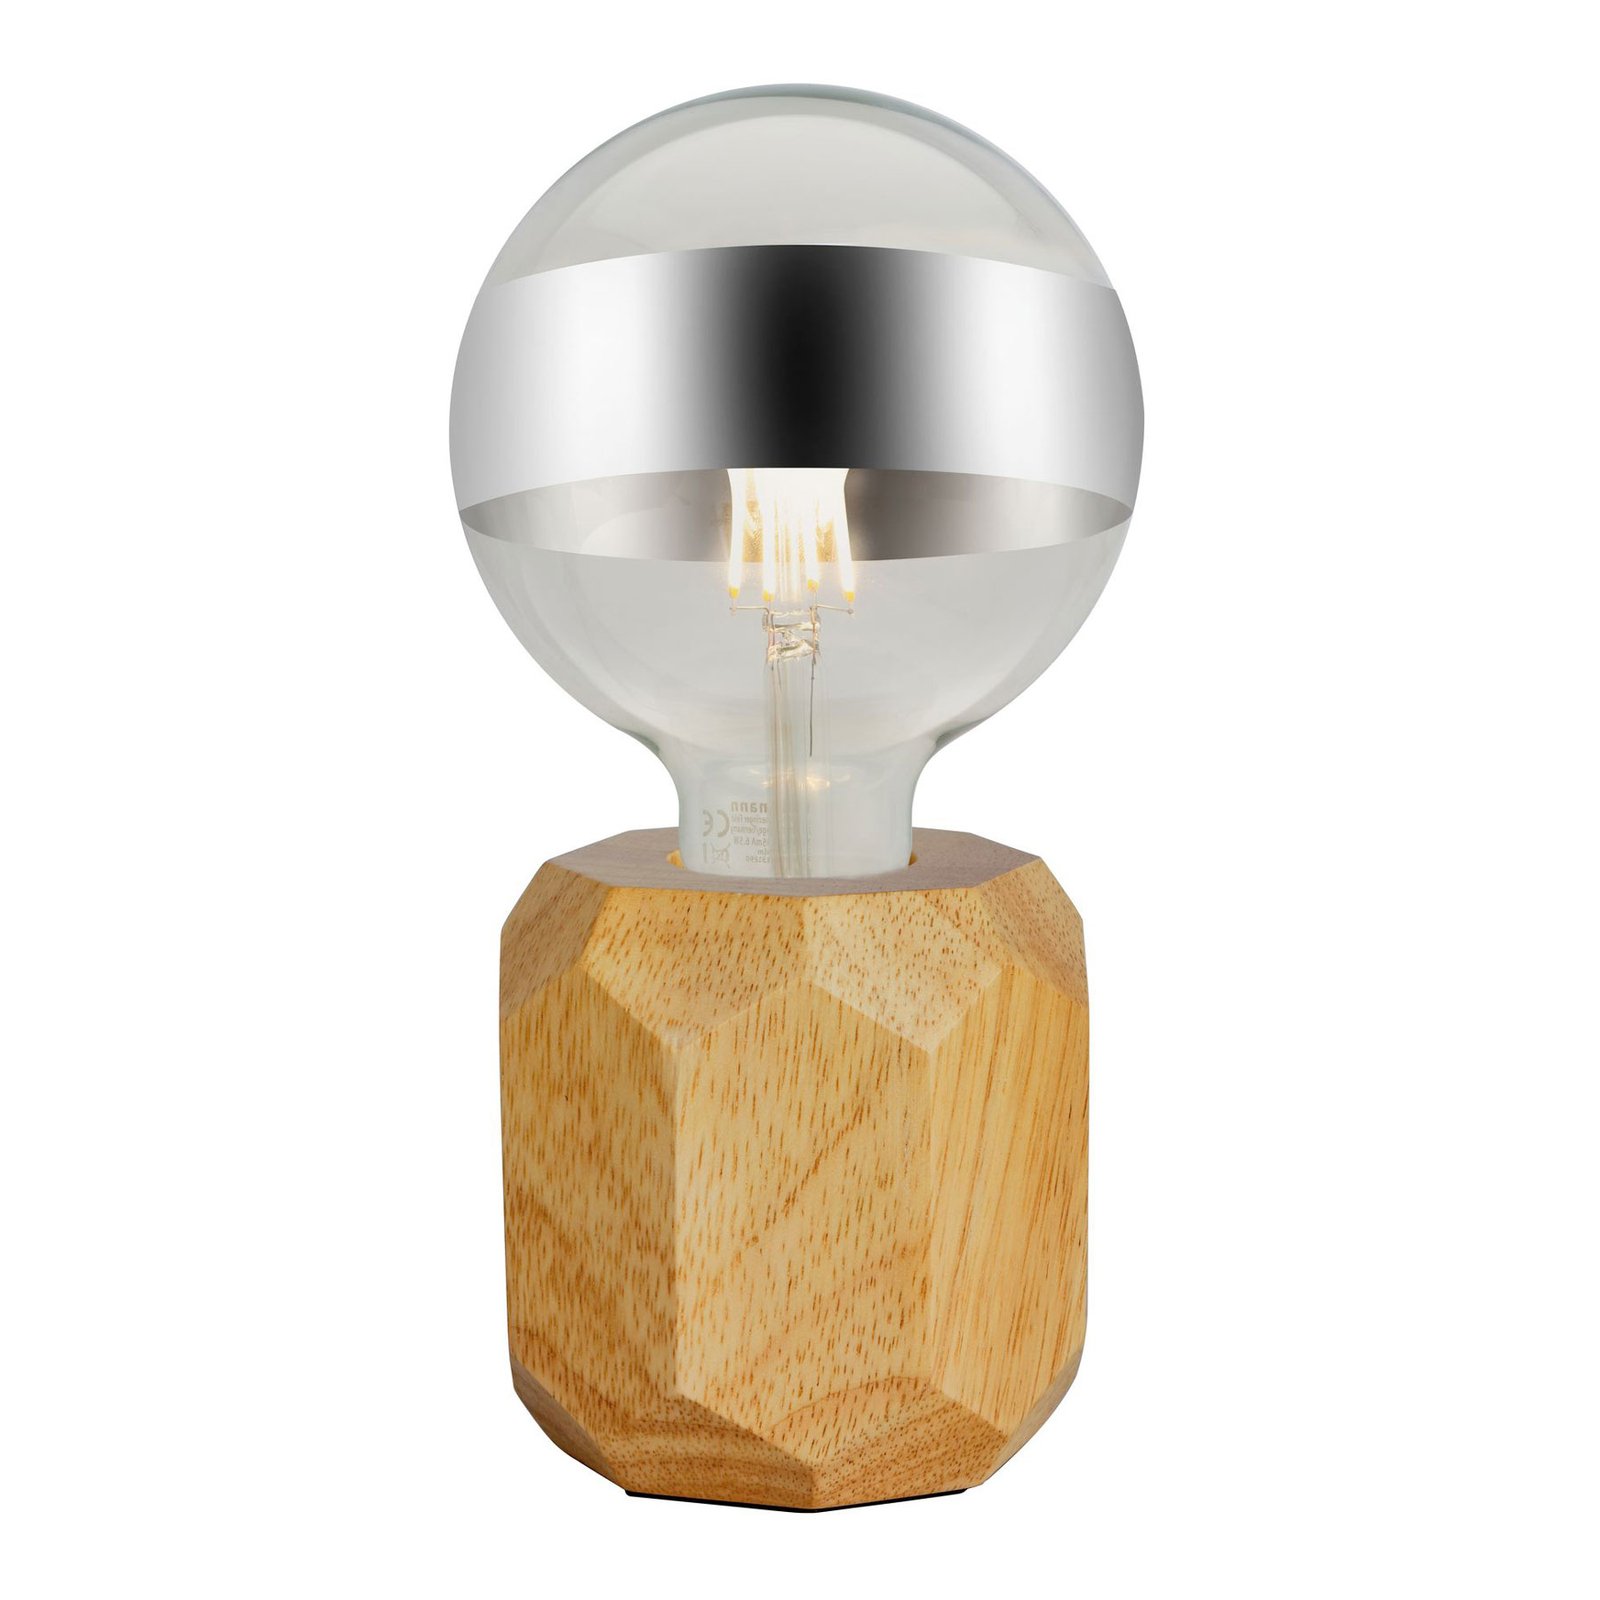 Pauleen Woody Sparkle table lamp in light wood